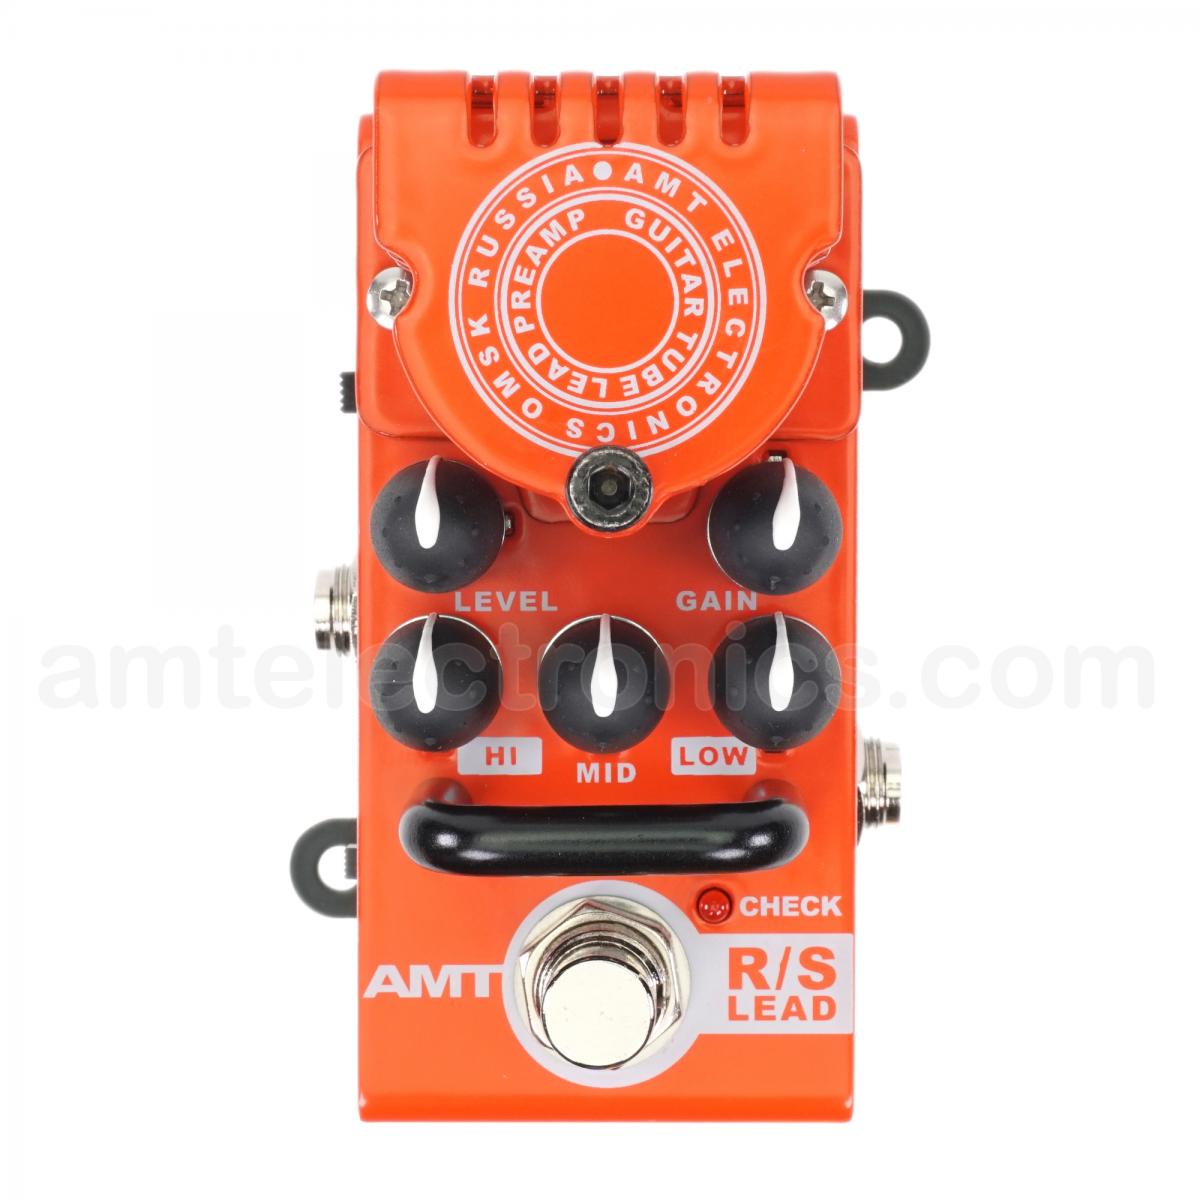 AMT R/S-lead | AMT Electronics official website